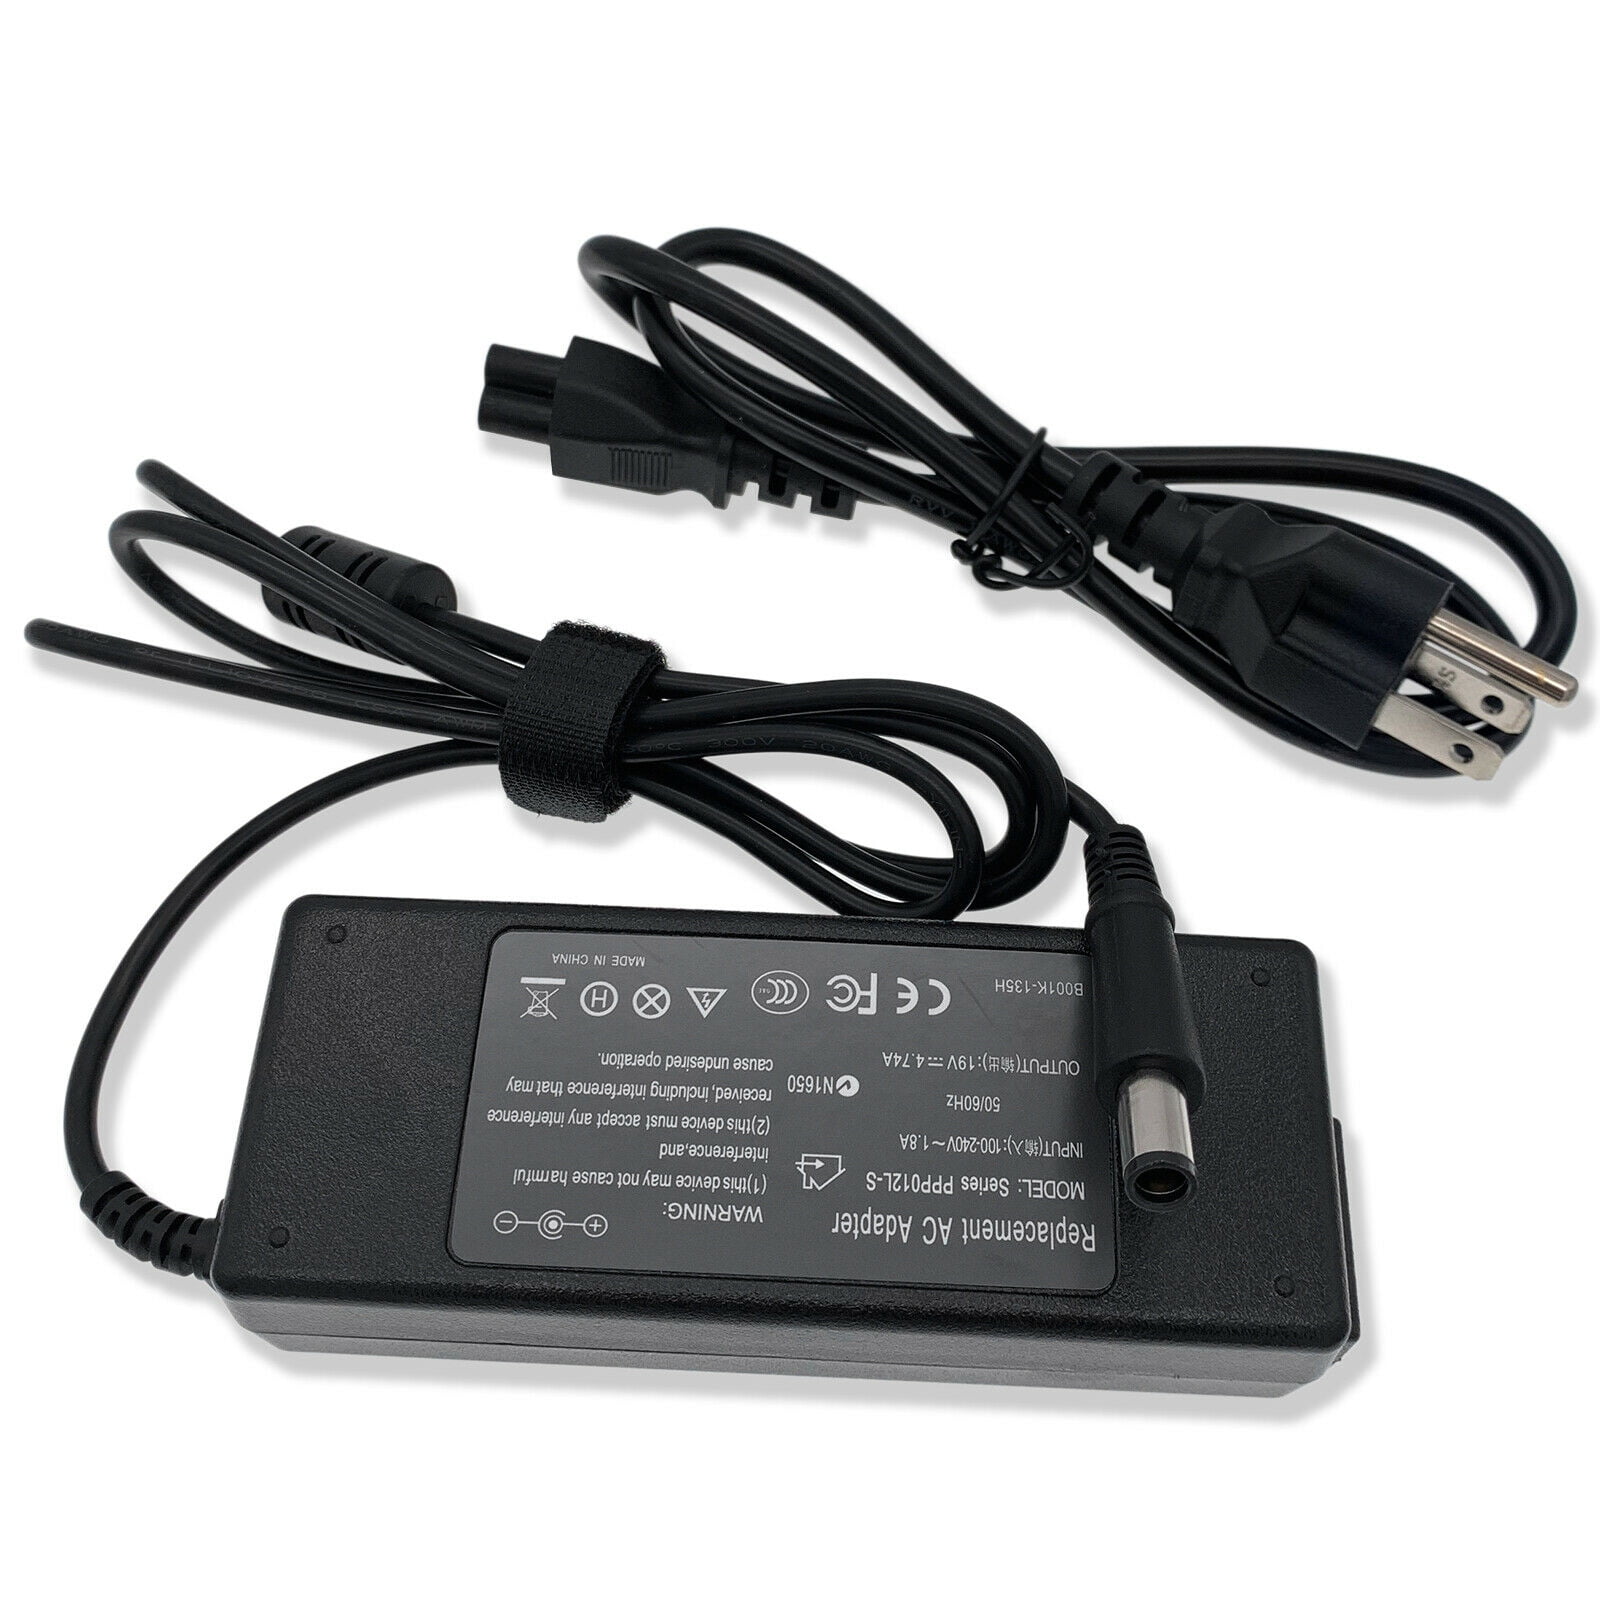 Globalsaving Power AC Adapter for HP 260 G1 G2 Desktop Mini PC Box Business DM Power Supply Cord Cable Charger 